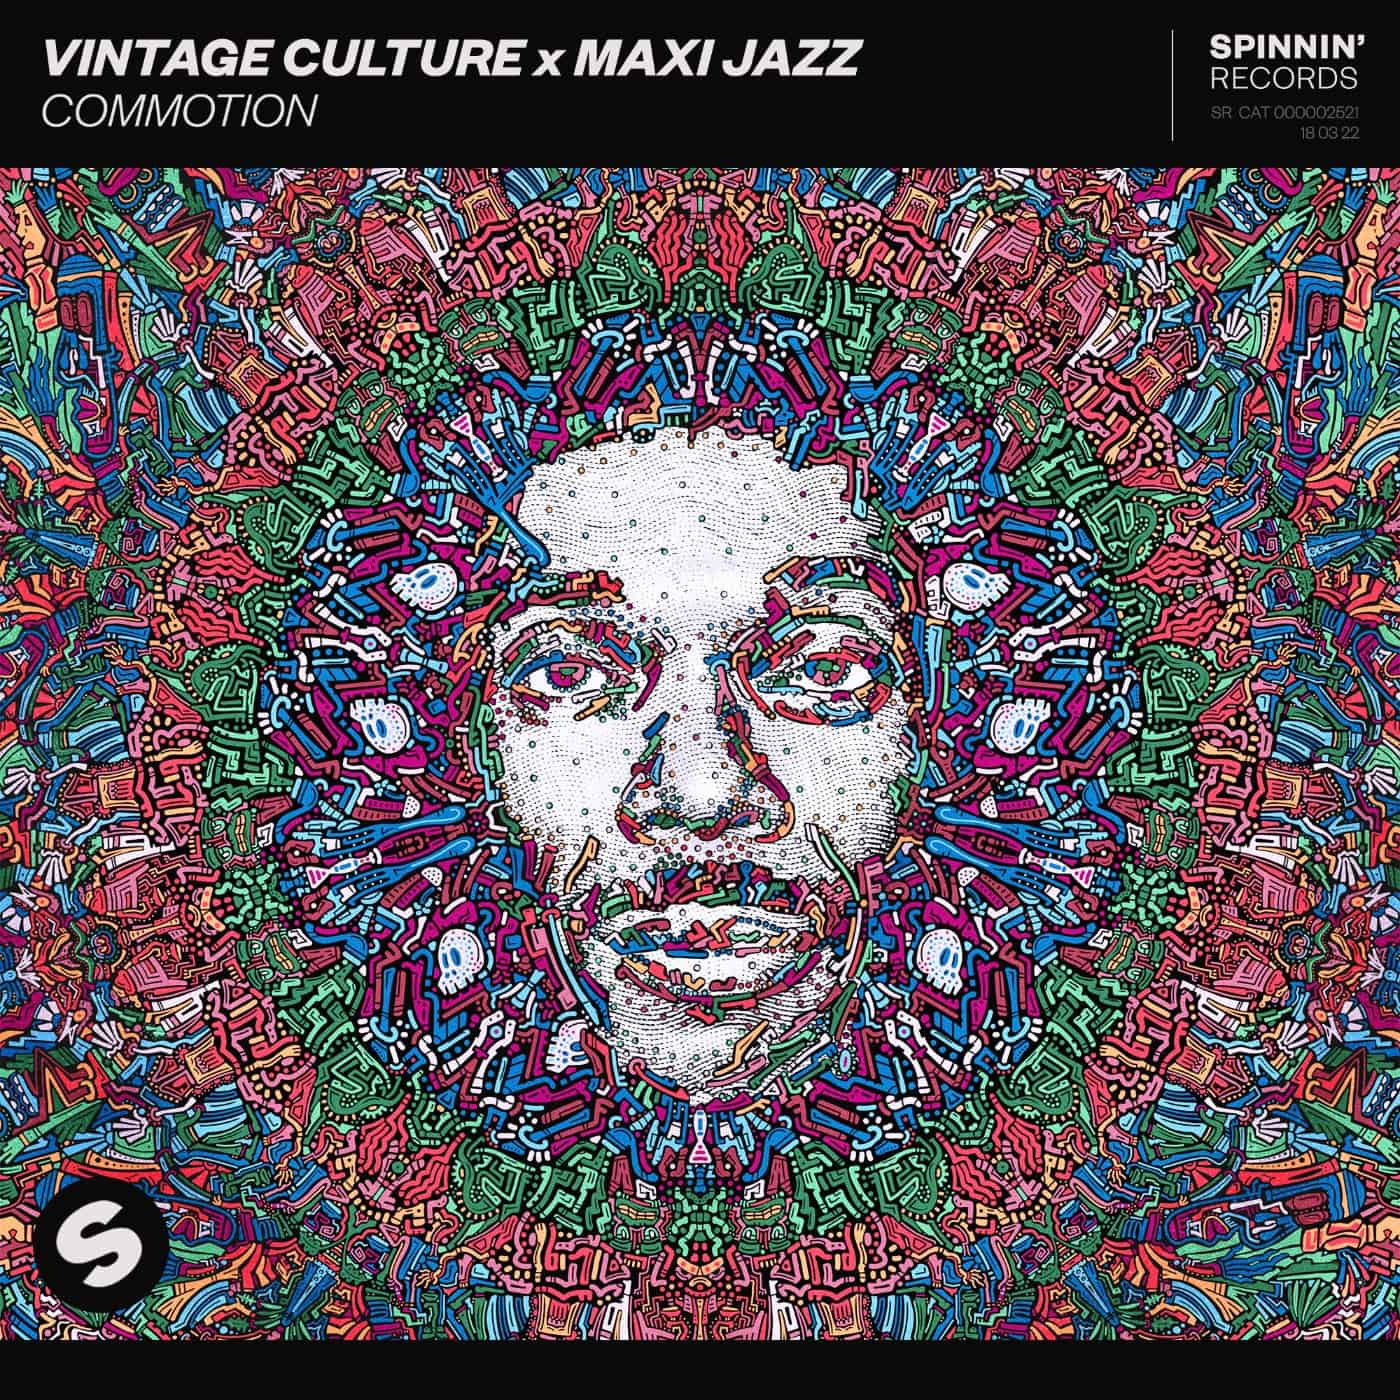 image cover: Maxi Jazz, Vintage Culture - Commotion (Extended Mix) / 190296205125